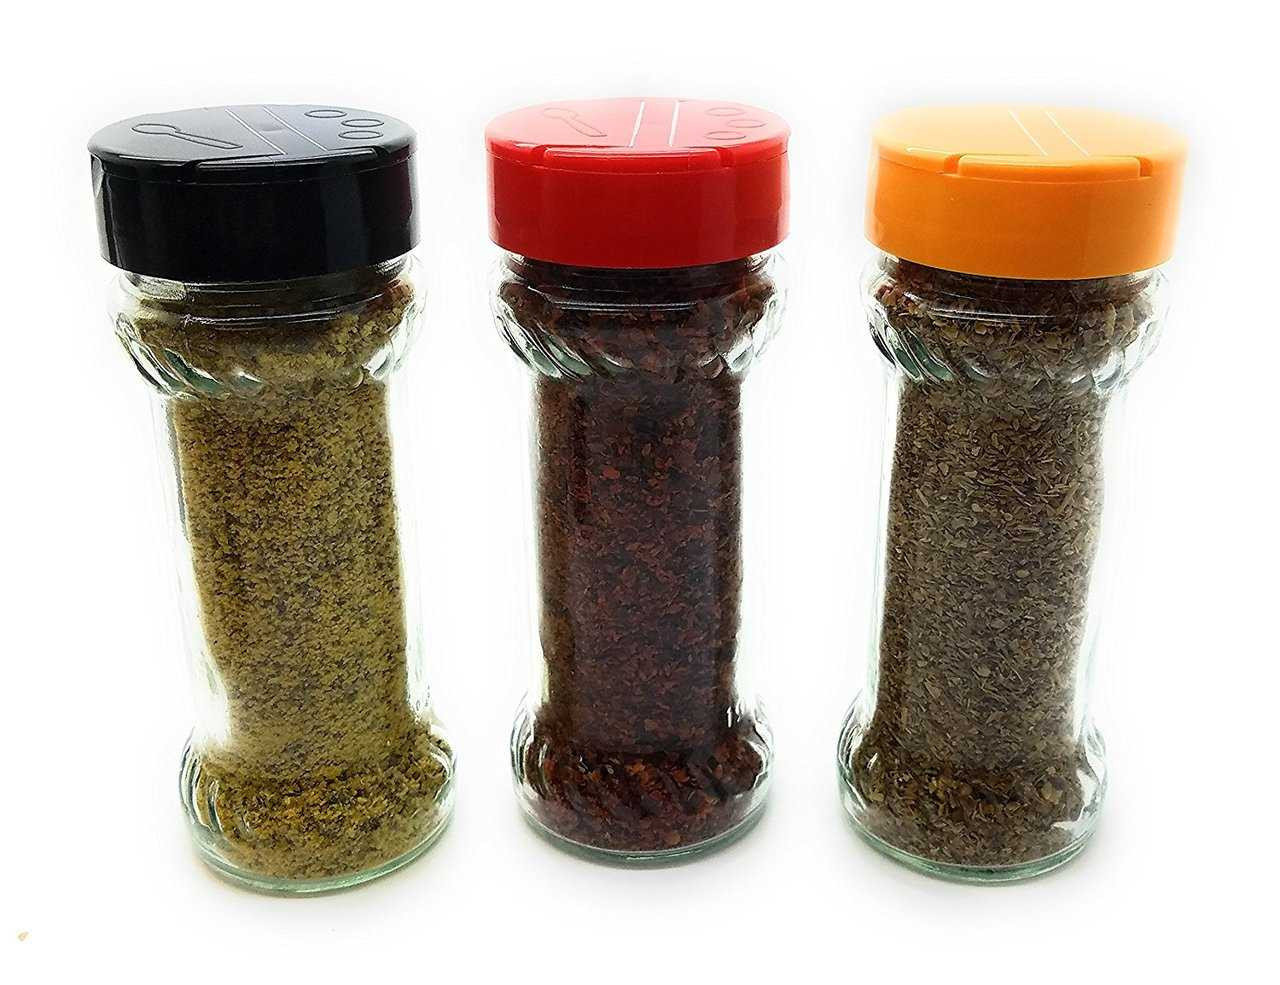 6pcs Black Spice Jars, 4 oz Glass Seasoning Bottles, Spices Container,  Empty Spice Jars , Square Spice Bottles with Airtight Plastic Caps with  Shaker